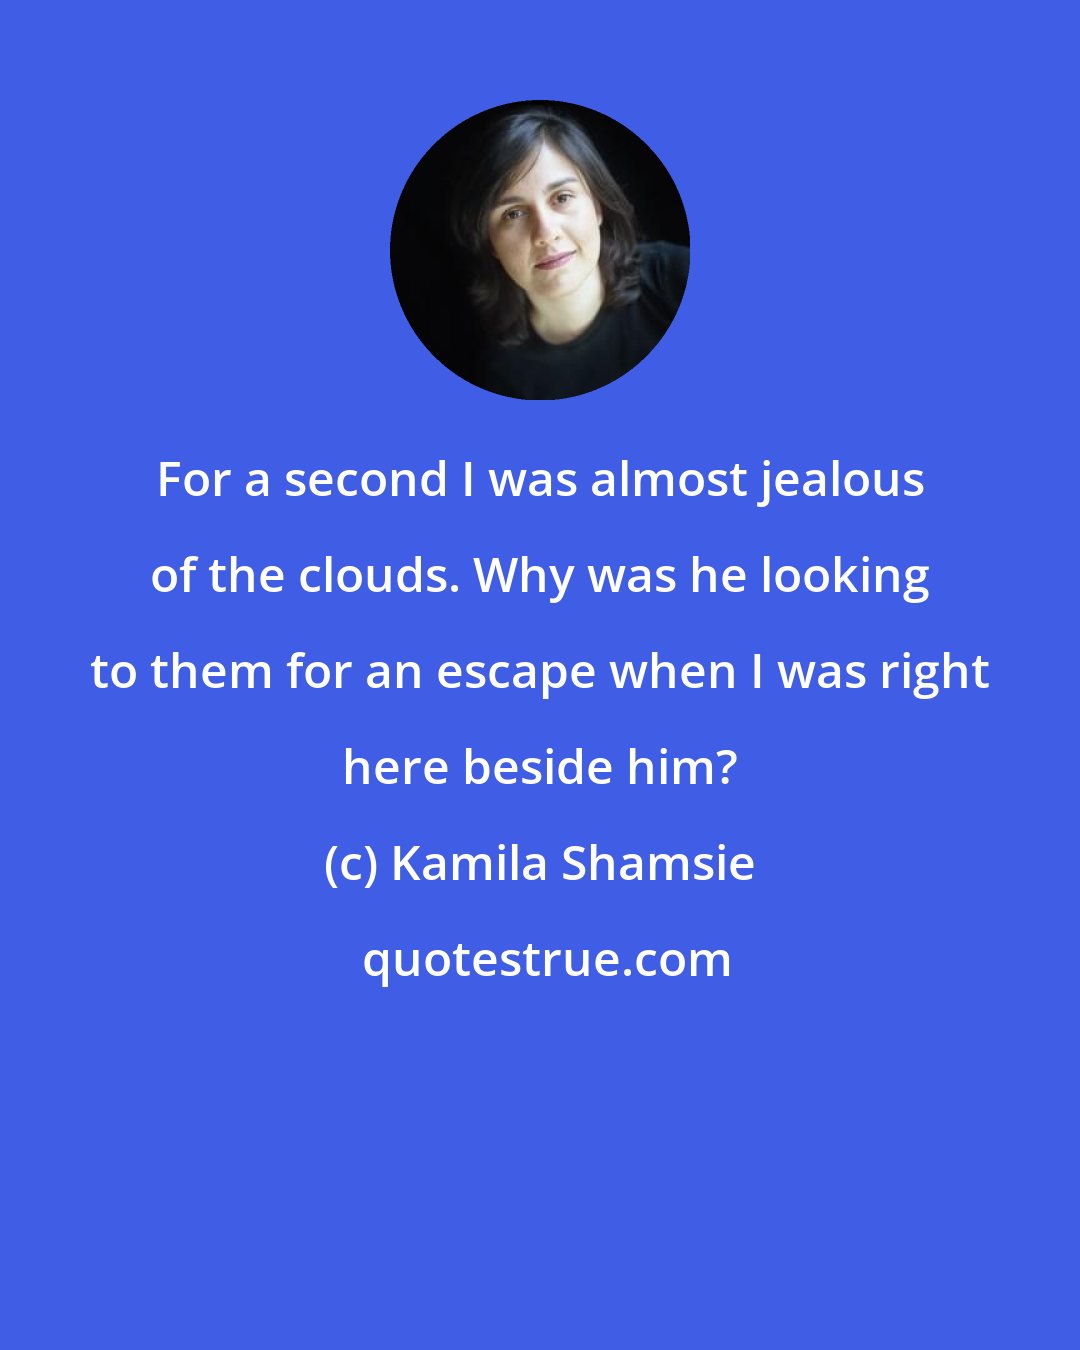 Kamila Shamsie: For a second I was almost jealous of the clouds. Why was he looking to them for an escape when I was right here beside him?